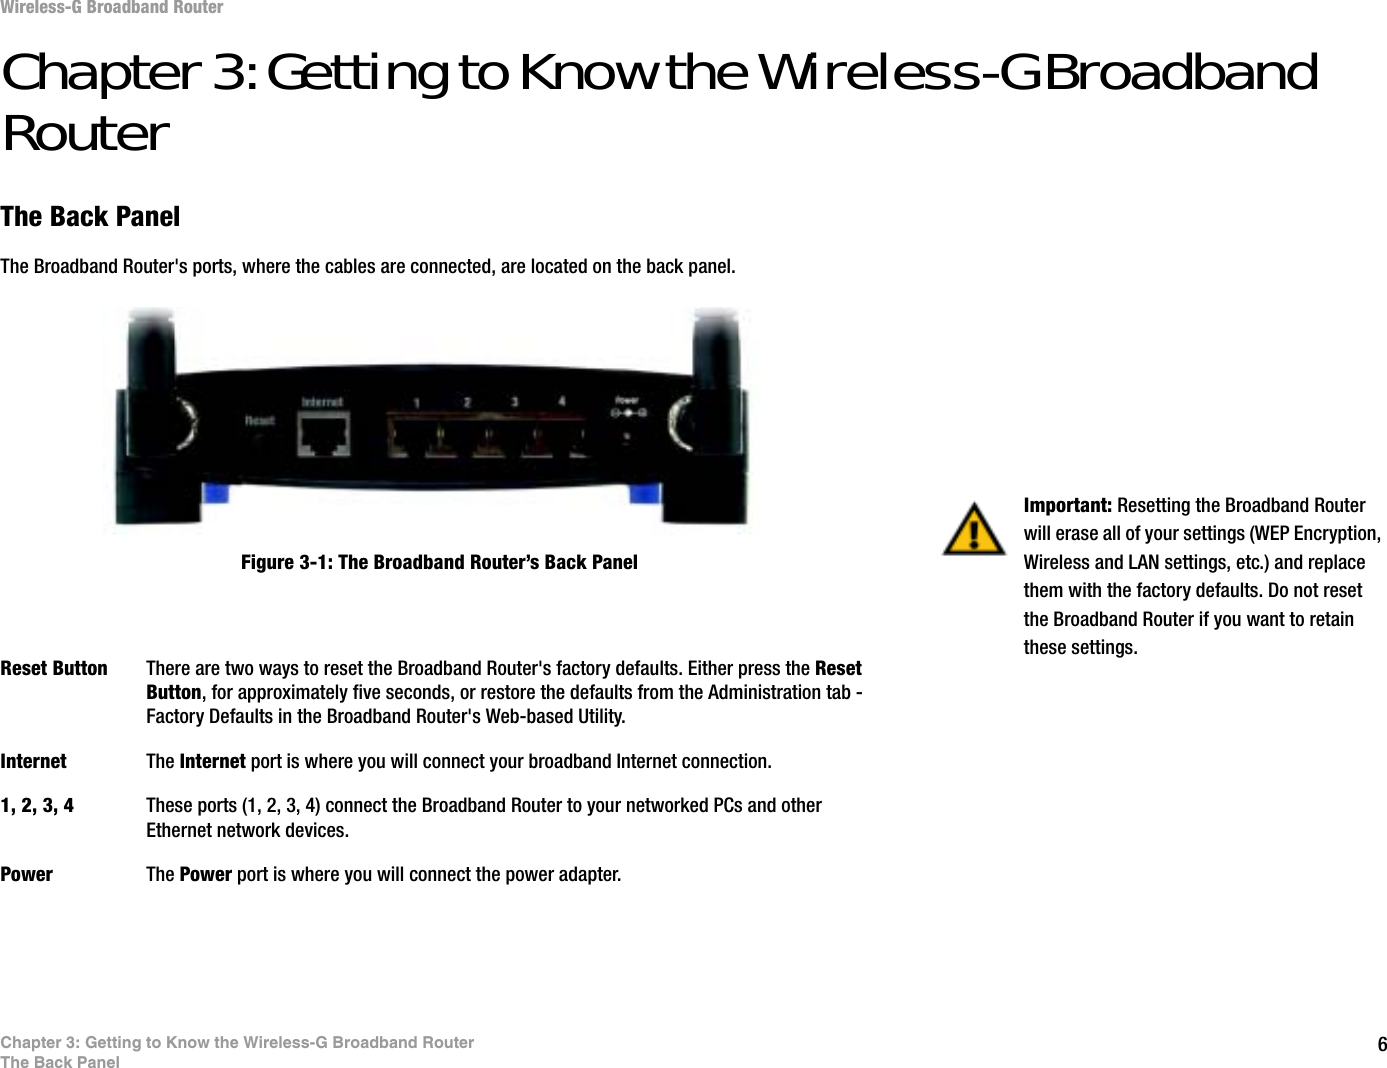 6Chapter 3: Getting to Know the Wireless-G Broadband RouterThe Back PanelWireless-G Broadband RouterChapter 3: Getting to Know the Wireless-G Broadband RouterThe Back PanelThe Broadband Router&apos;s ports, where the cables are connected, are located on the back panel.Reset Button There are two ways to reset the Broadband Router&apos;s factory defaults. Either press the ResetButton, for approximately five seconds, or restore the defaults from the Administration tab - Factory Defaults in the Broadband Router&apos;s Web-based Utility.Internet The Internet port is where you will connect your broadband Internet connection.1, 2, 3, 4 These ports (1, 2, 3, 4) connect the Broadband Router to your networked PCs and other Ethernet network devices.Power The Power port is where you will connect the power adapter.Important: Resetting the Broadband Router will erase all of your settings (WEP Encryption, Wireless and LAN settings, etc.) and replace them with the factory defaults. Do not reset the Broadband Router if you want to retain these settings.Figure 3-1: The Broadband Router’s Back Panel